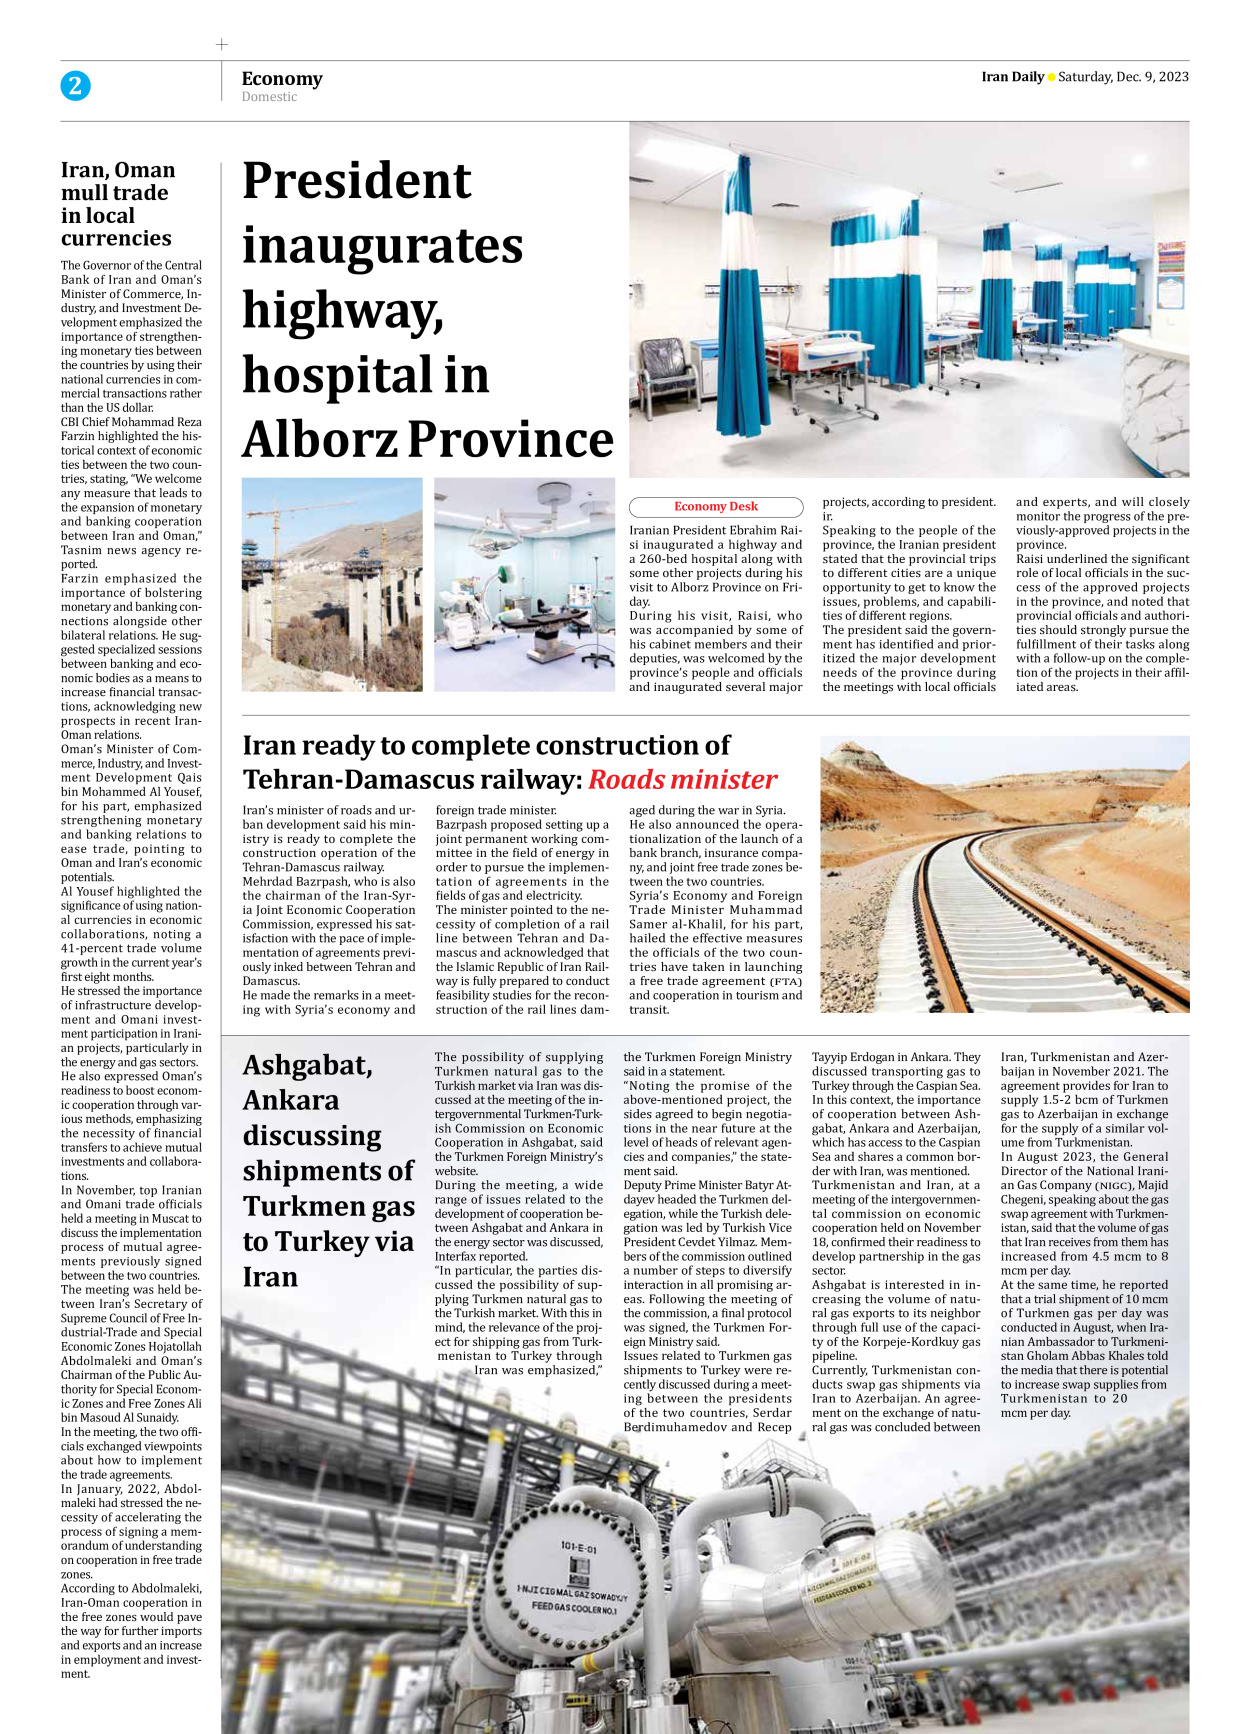 Iran Daily - Number Seven Thousand Four Hundred and Fifty Five - 09 December 2023 - Page 2